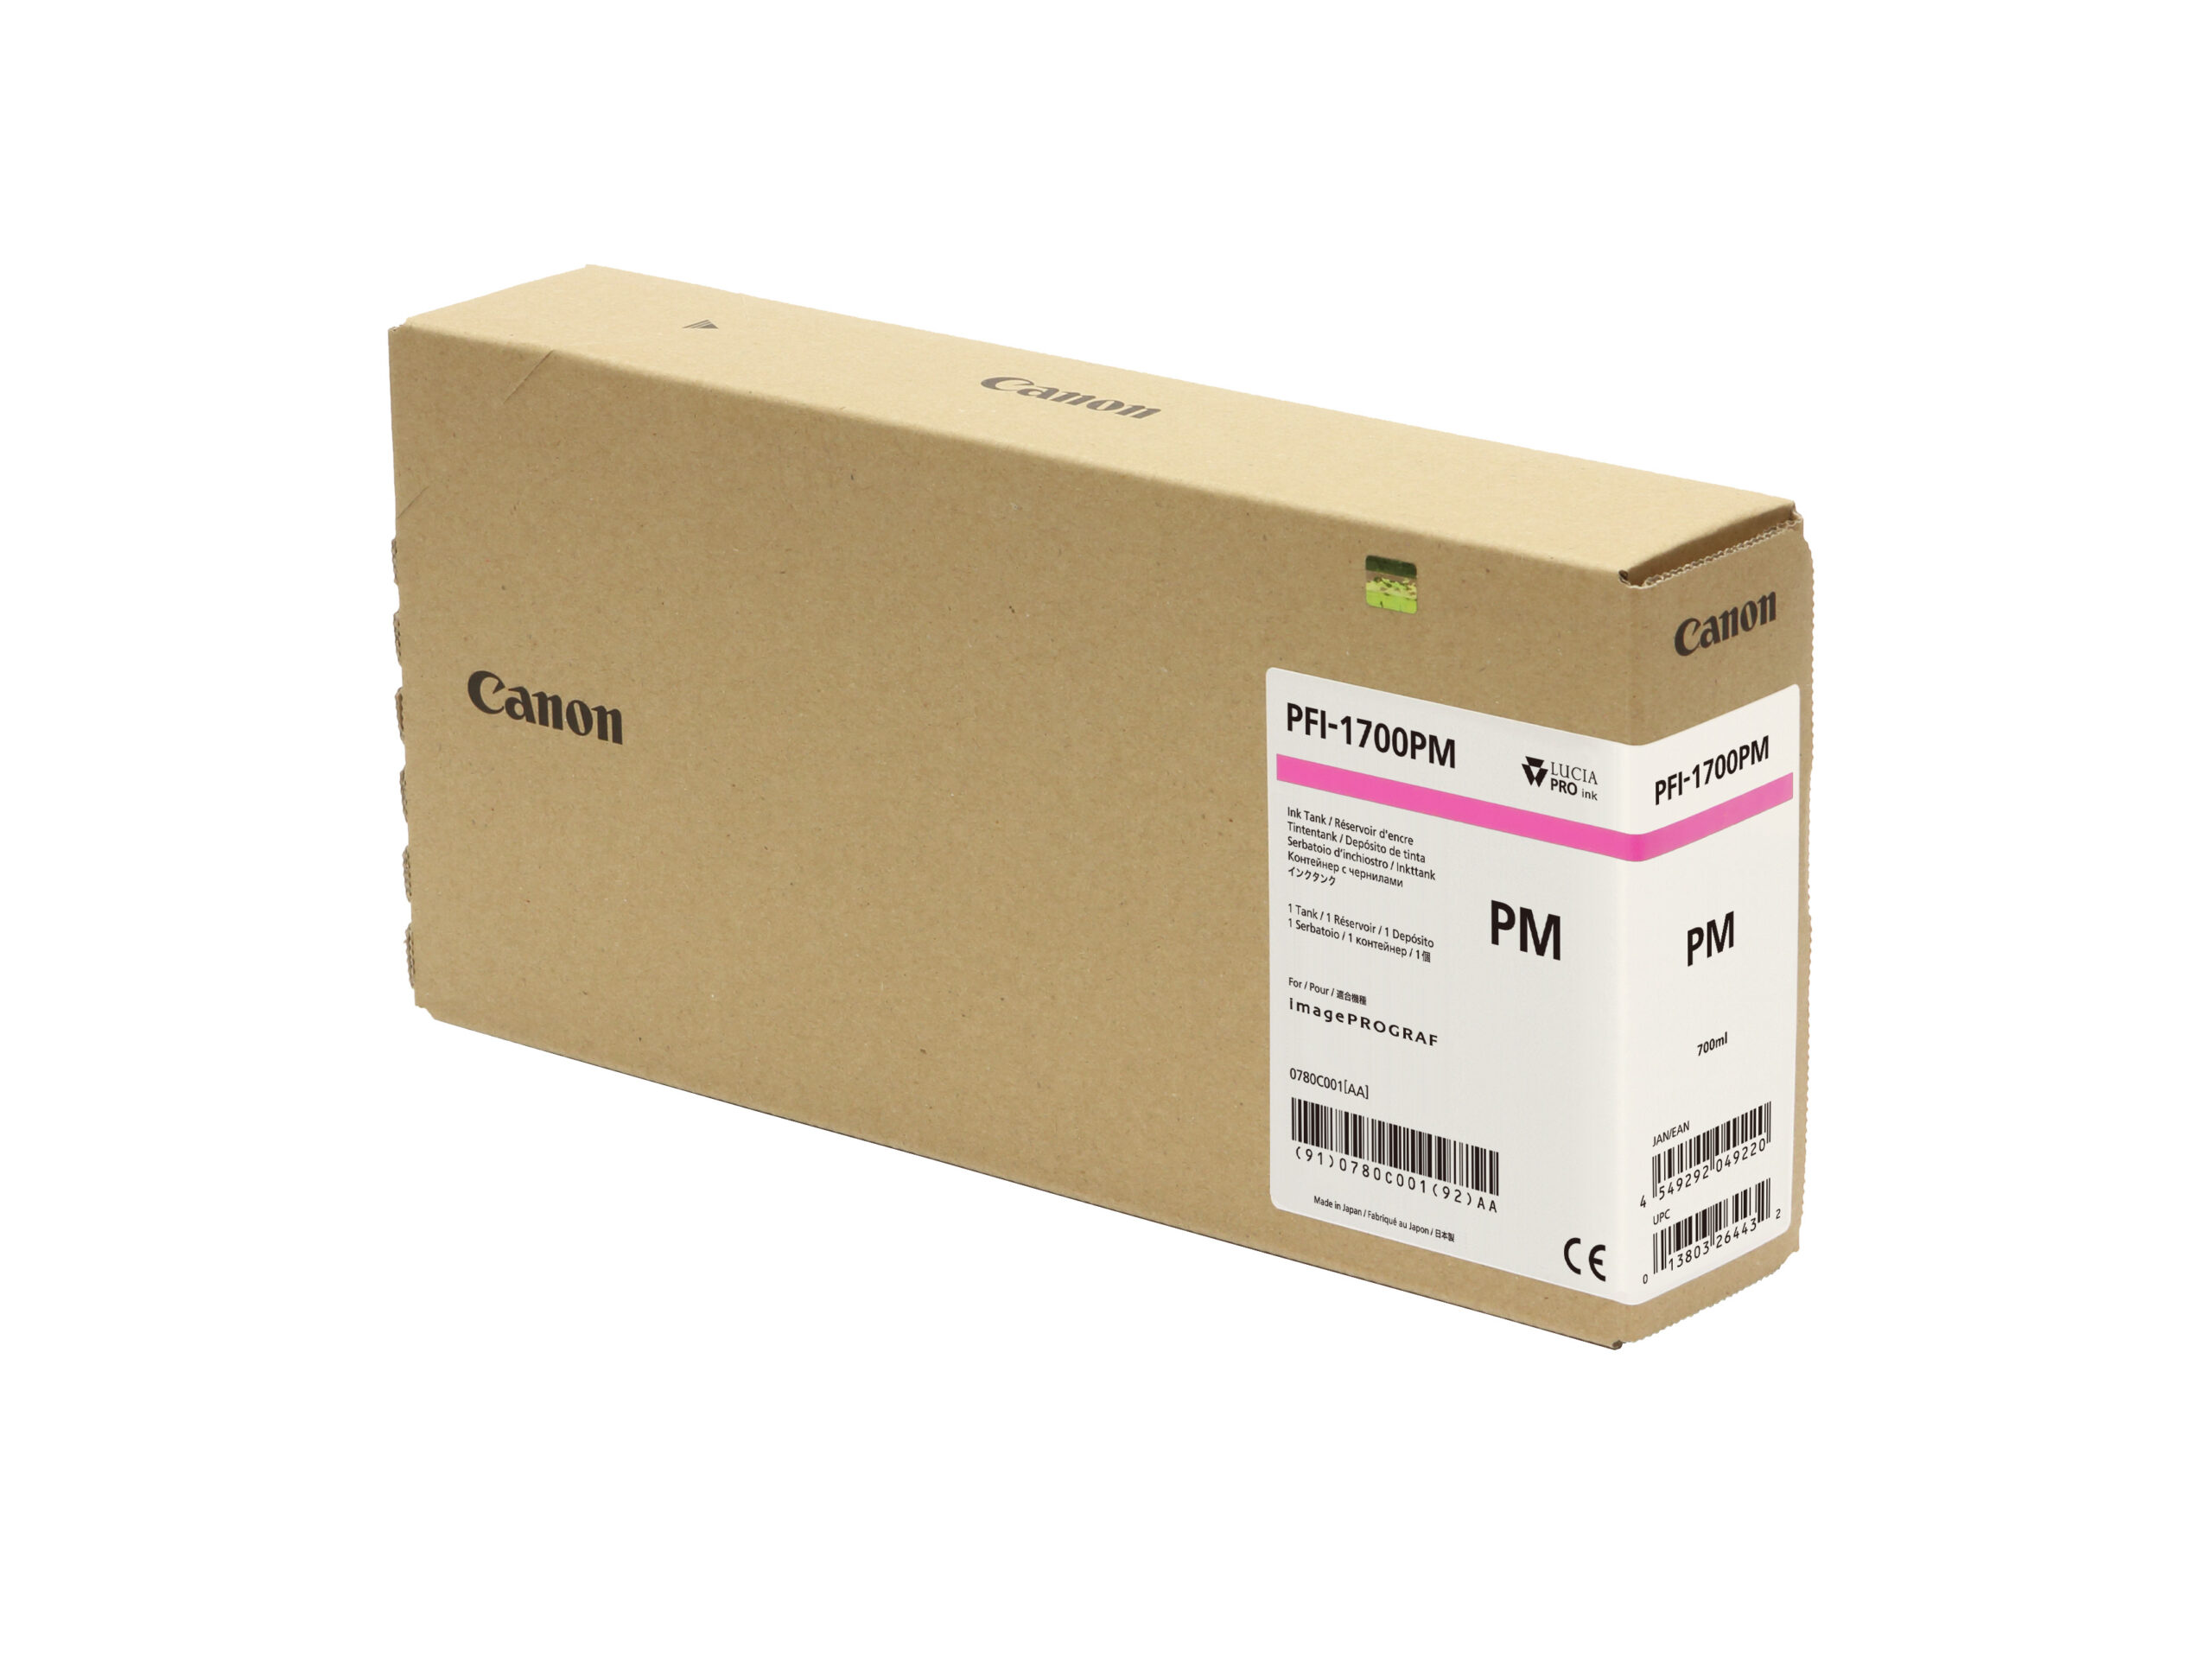 Canon PFI-1700PM Photo Magenta Ink Tank - 700ml Cartridge - for Canon PRO-2000, PRO-4000, PRO-4000S & PRO-6000S Printer - 0780C001AA - next day delivery from GDS Graphic Design Supplies Ltd